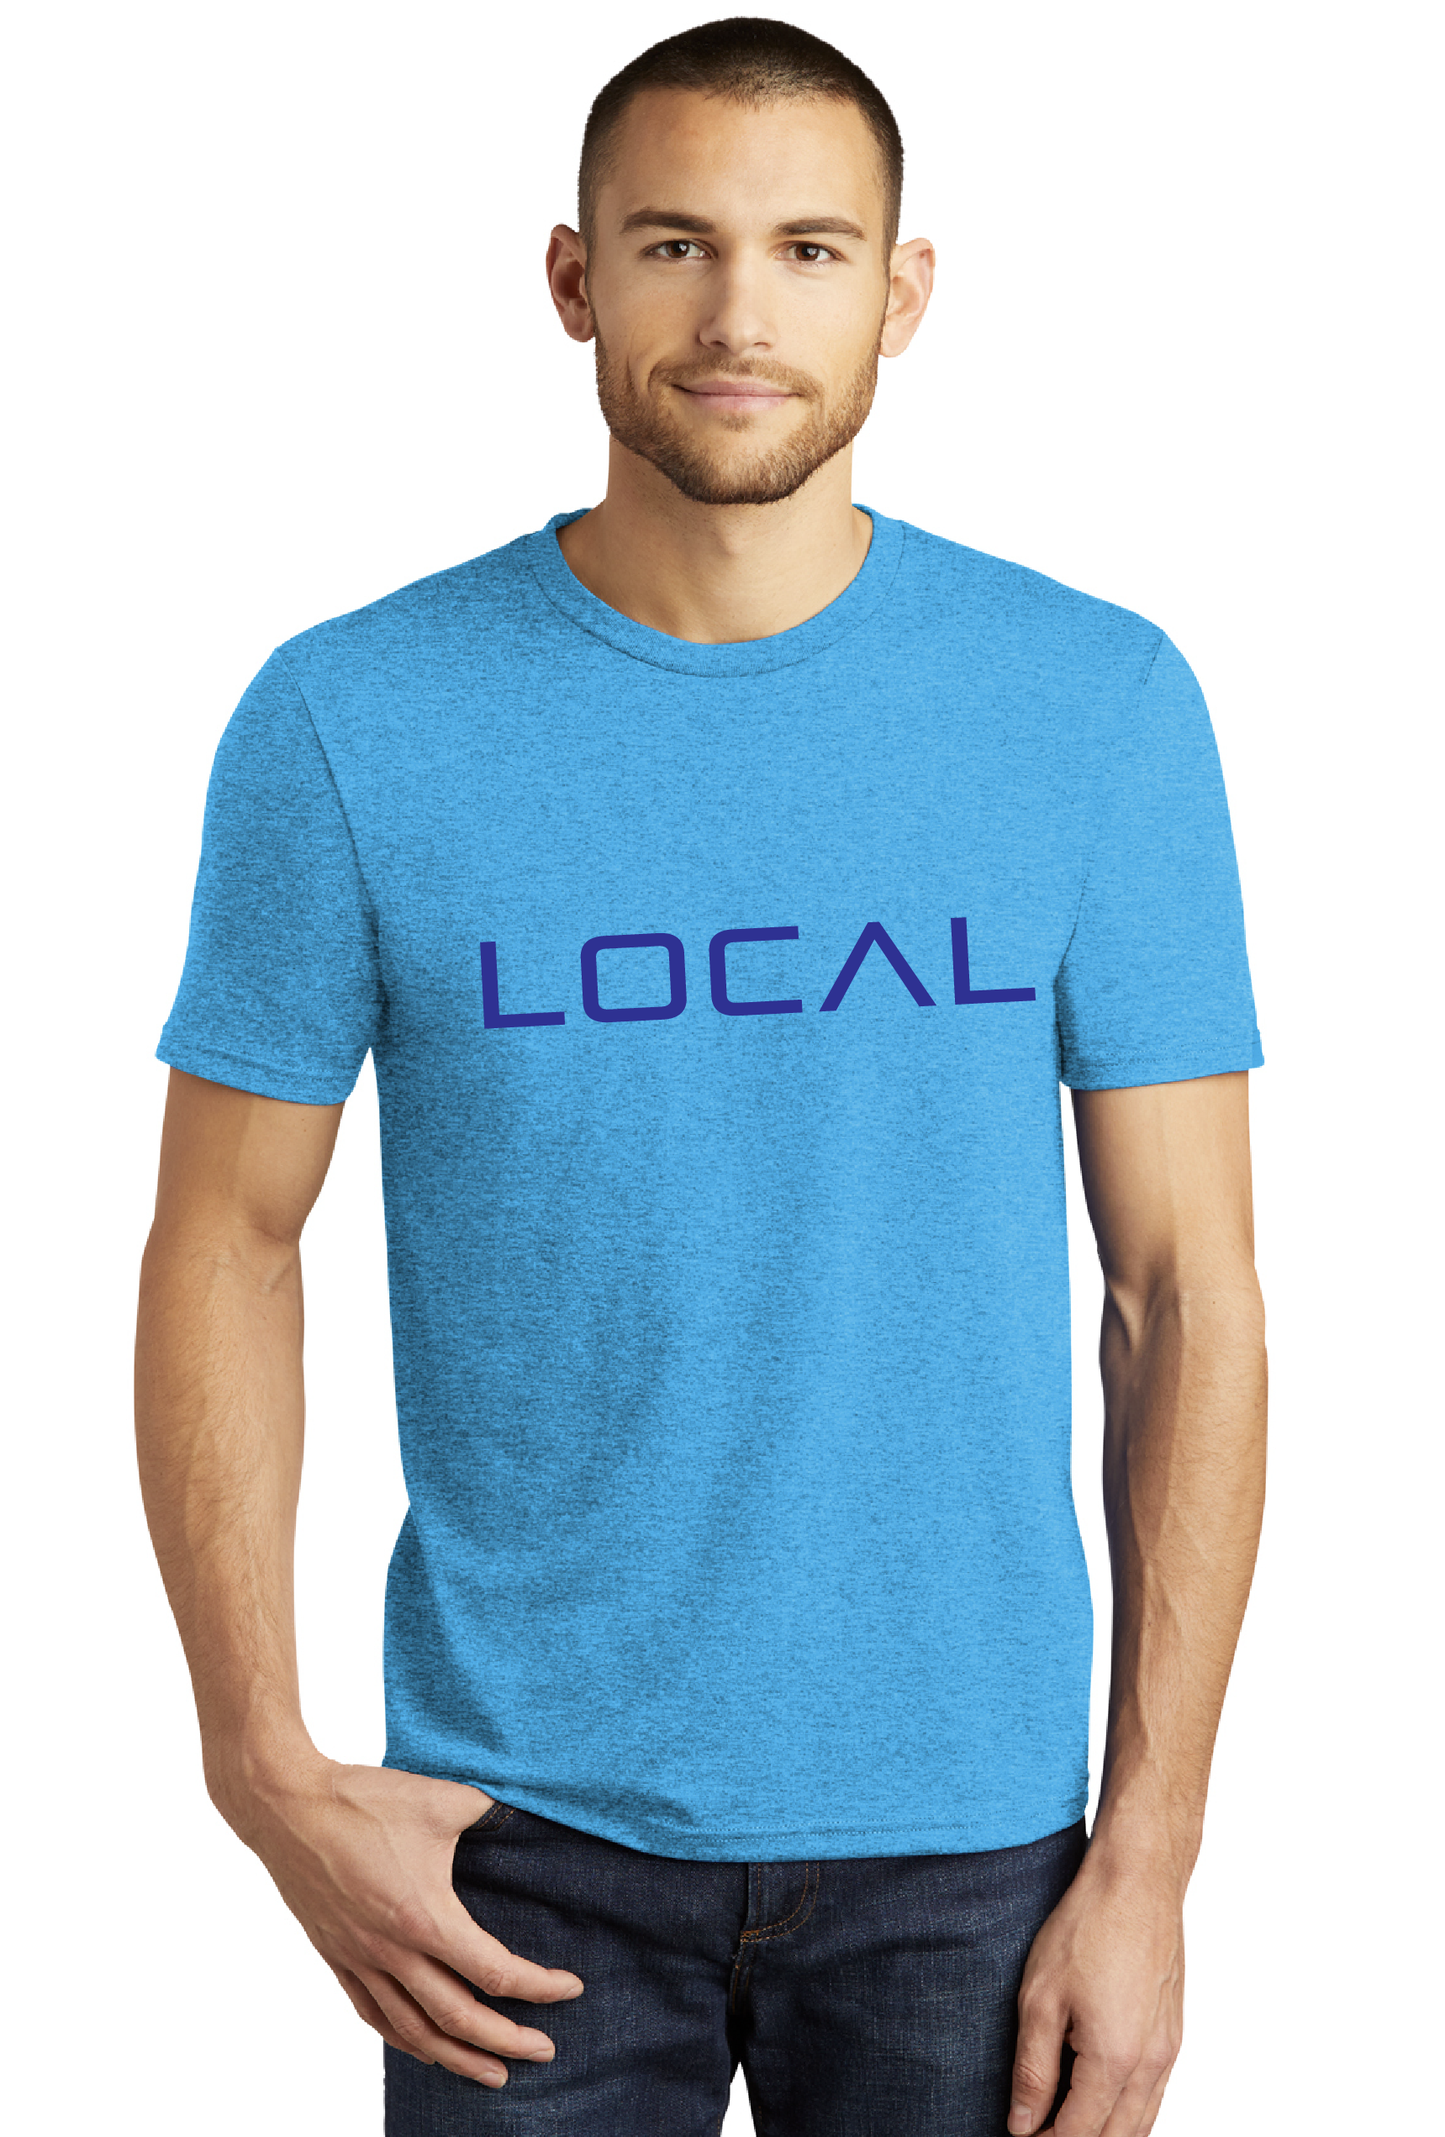 Unisex Heather Triblend Tee / Turquoise Frost / Local